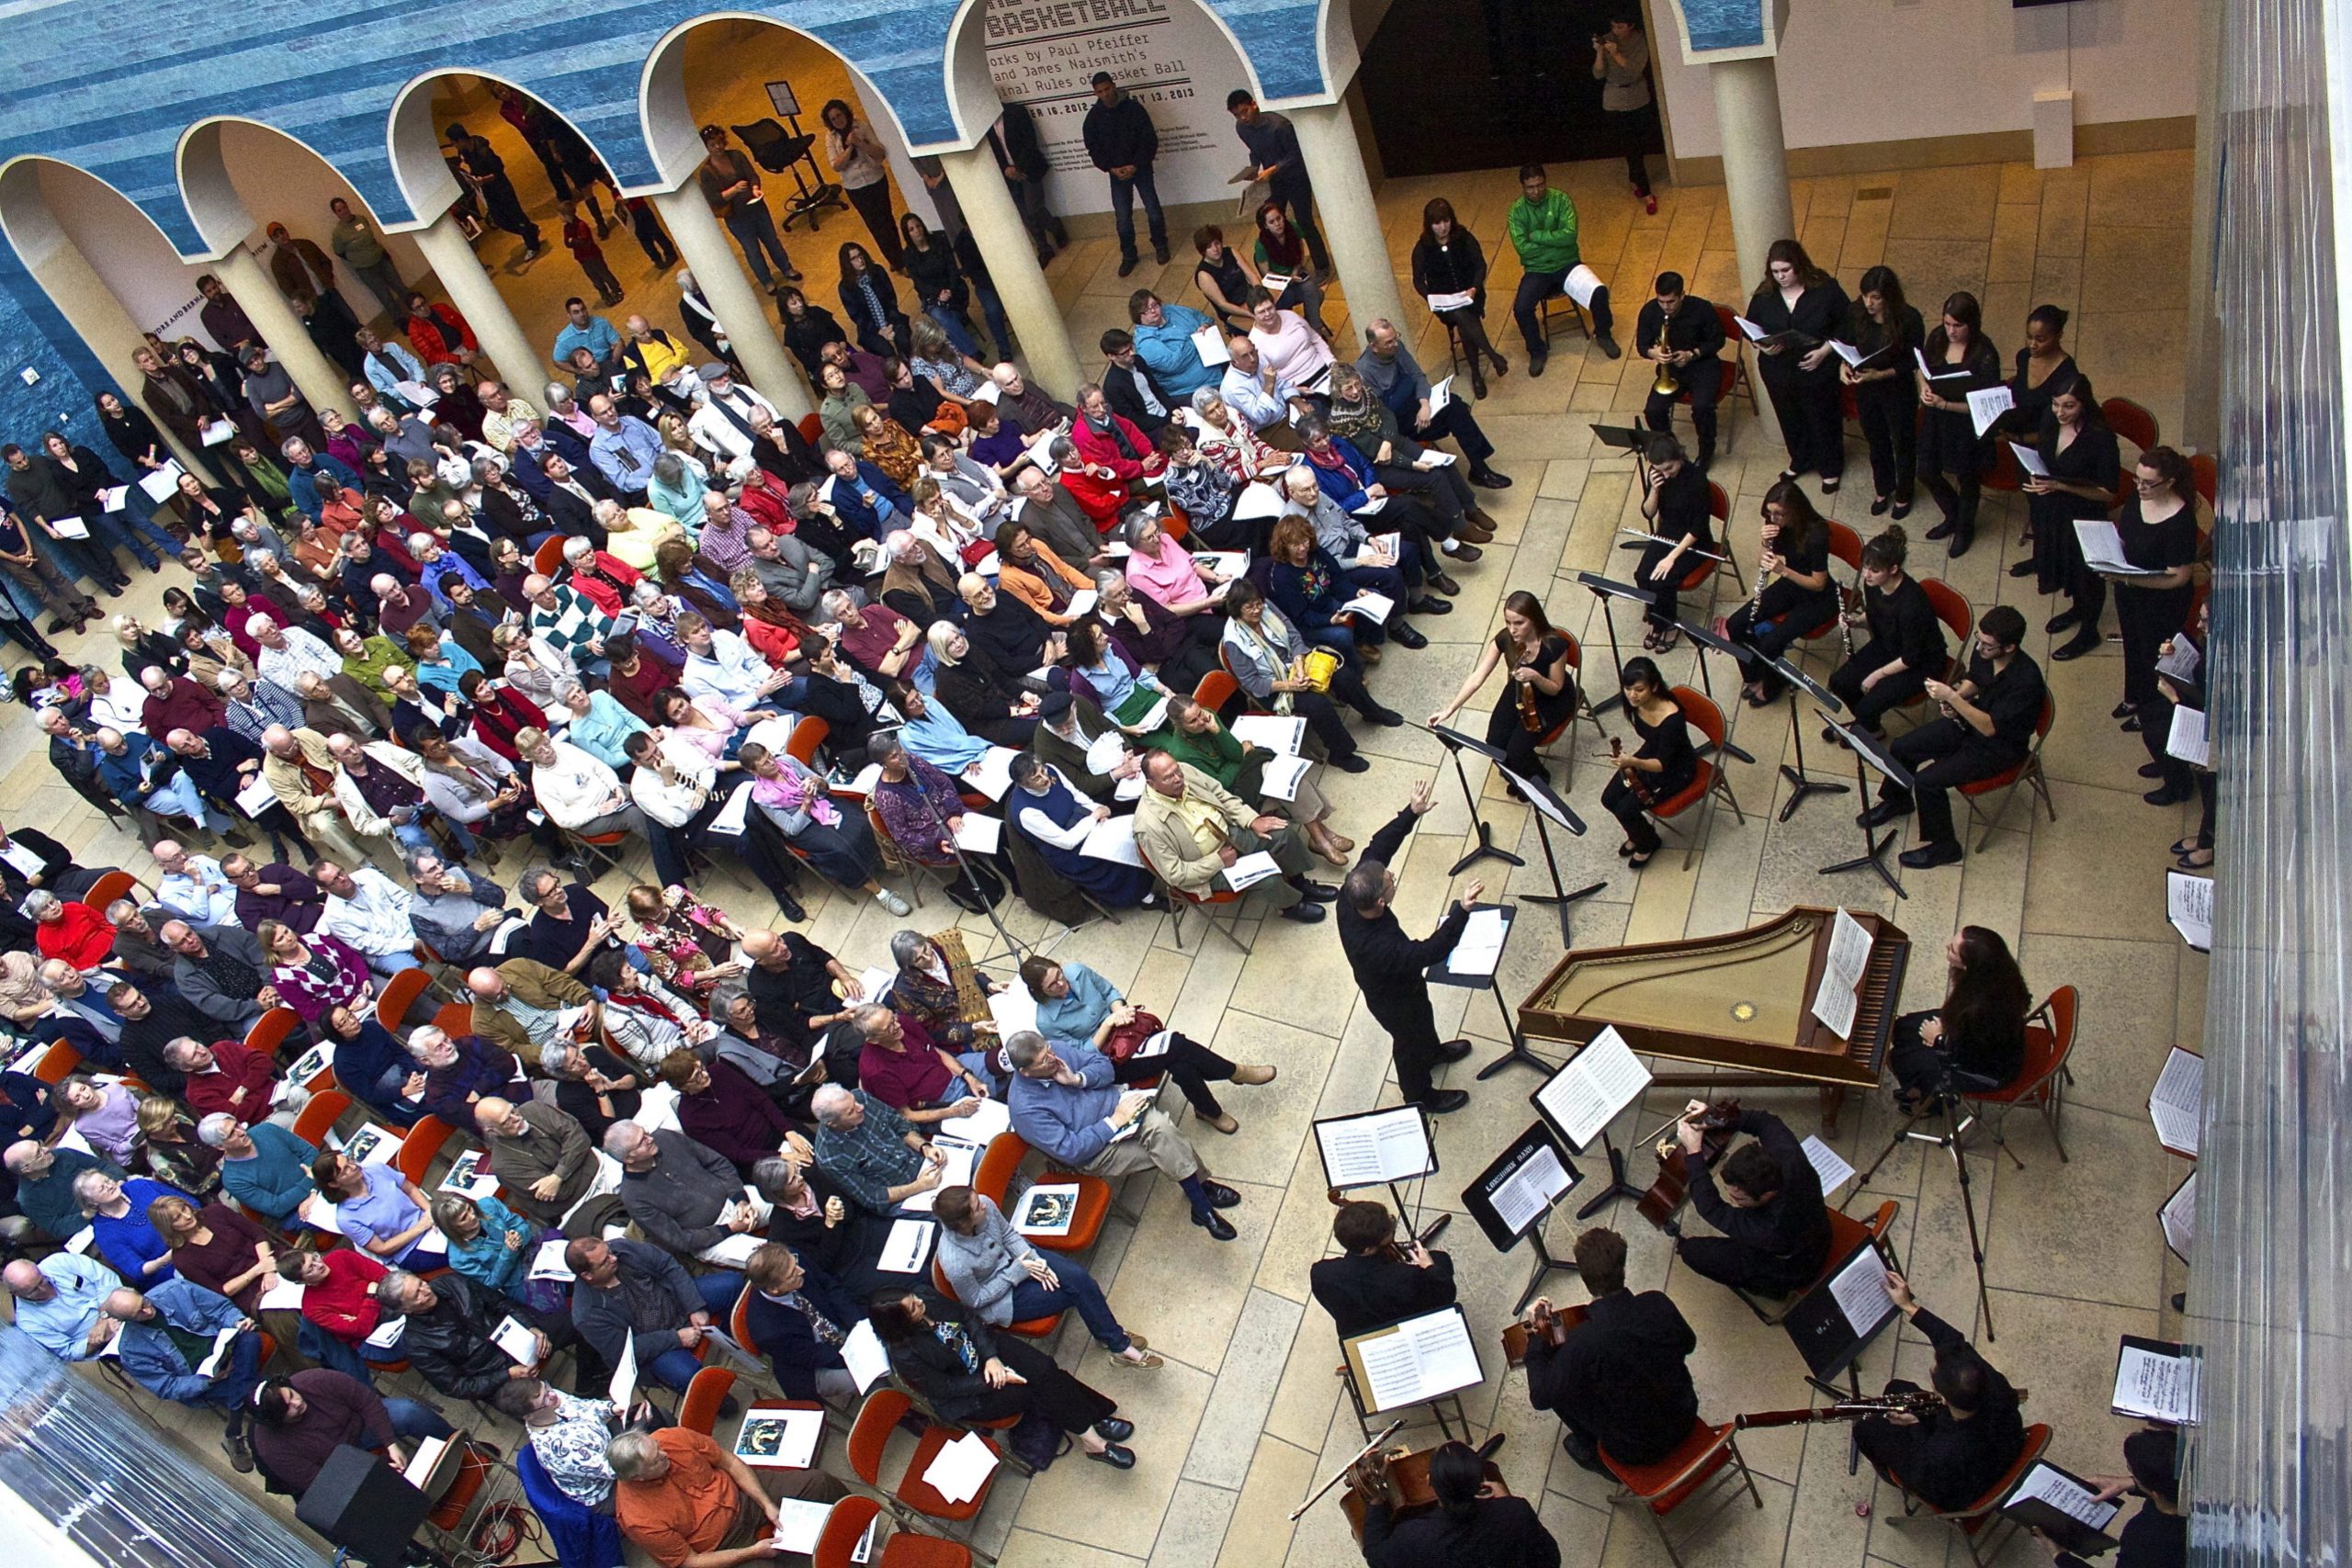 Arial photo of a seated crowd in the Blanton atrium viewing an orchestra performance